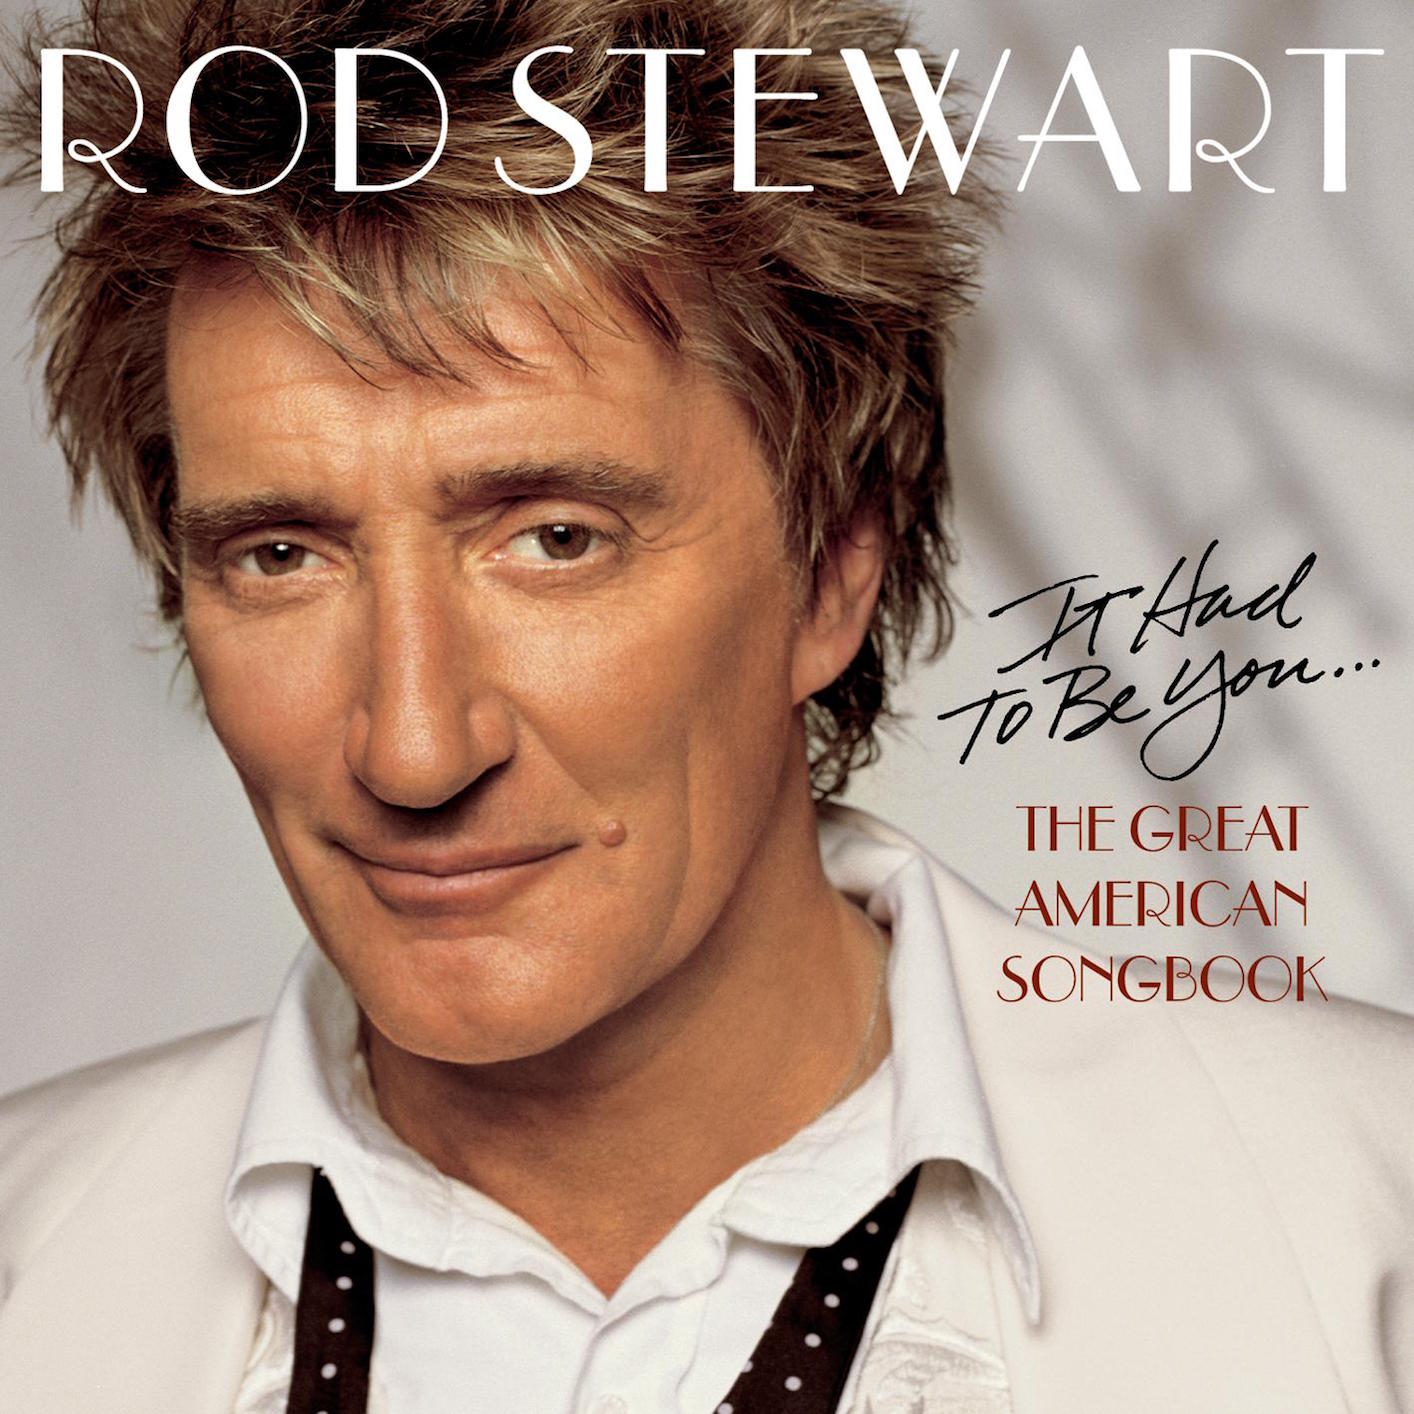 Rod Stewart – It Had To Be You… The Great American Songbook (2002/2015) [HDTracks FLAC 24bit/44,1kHz]